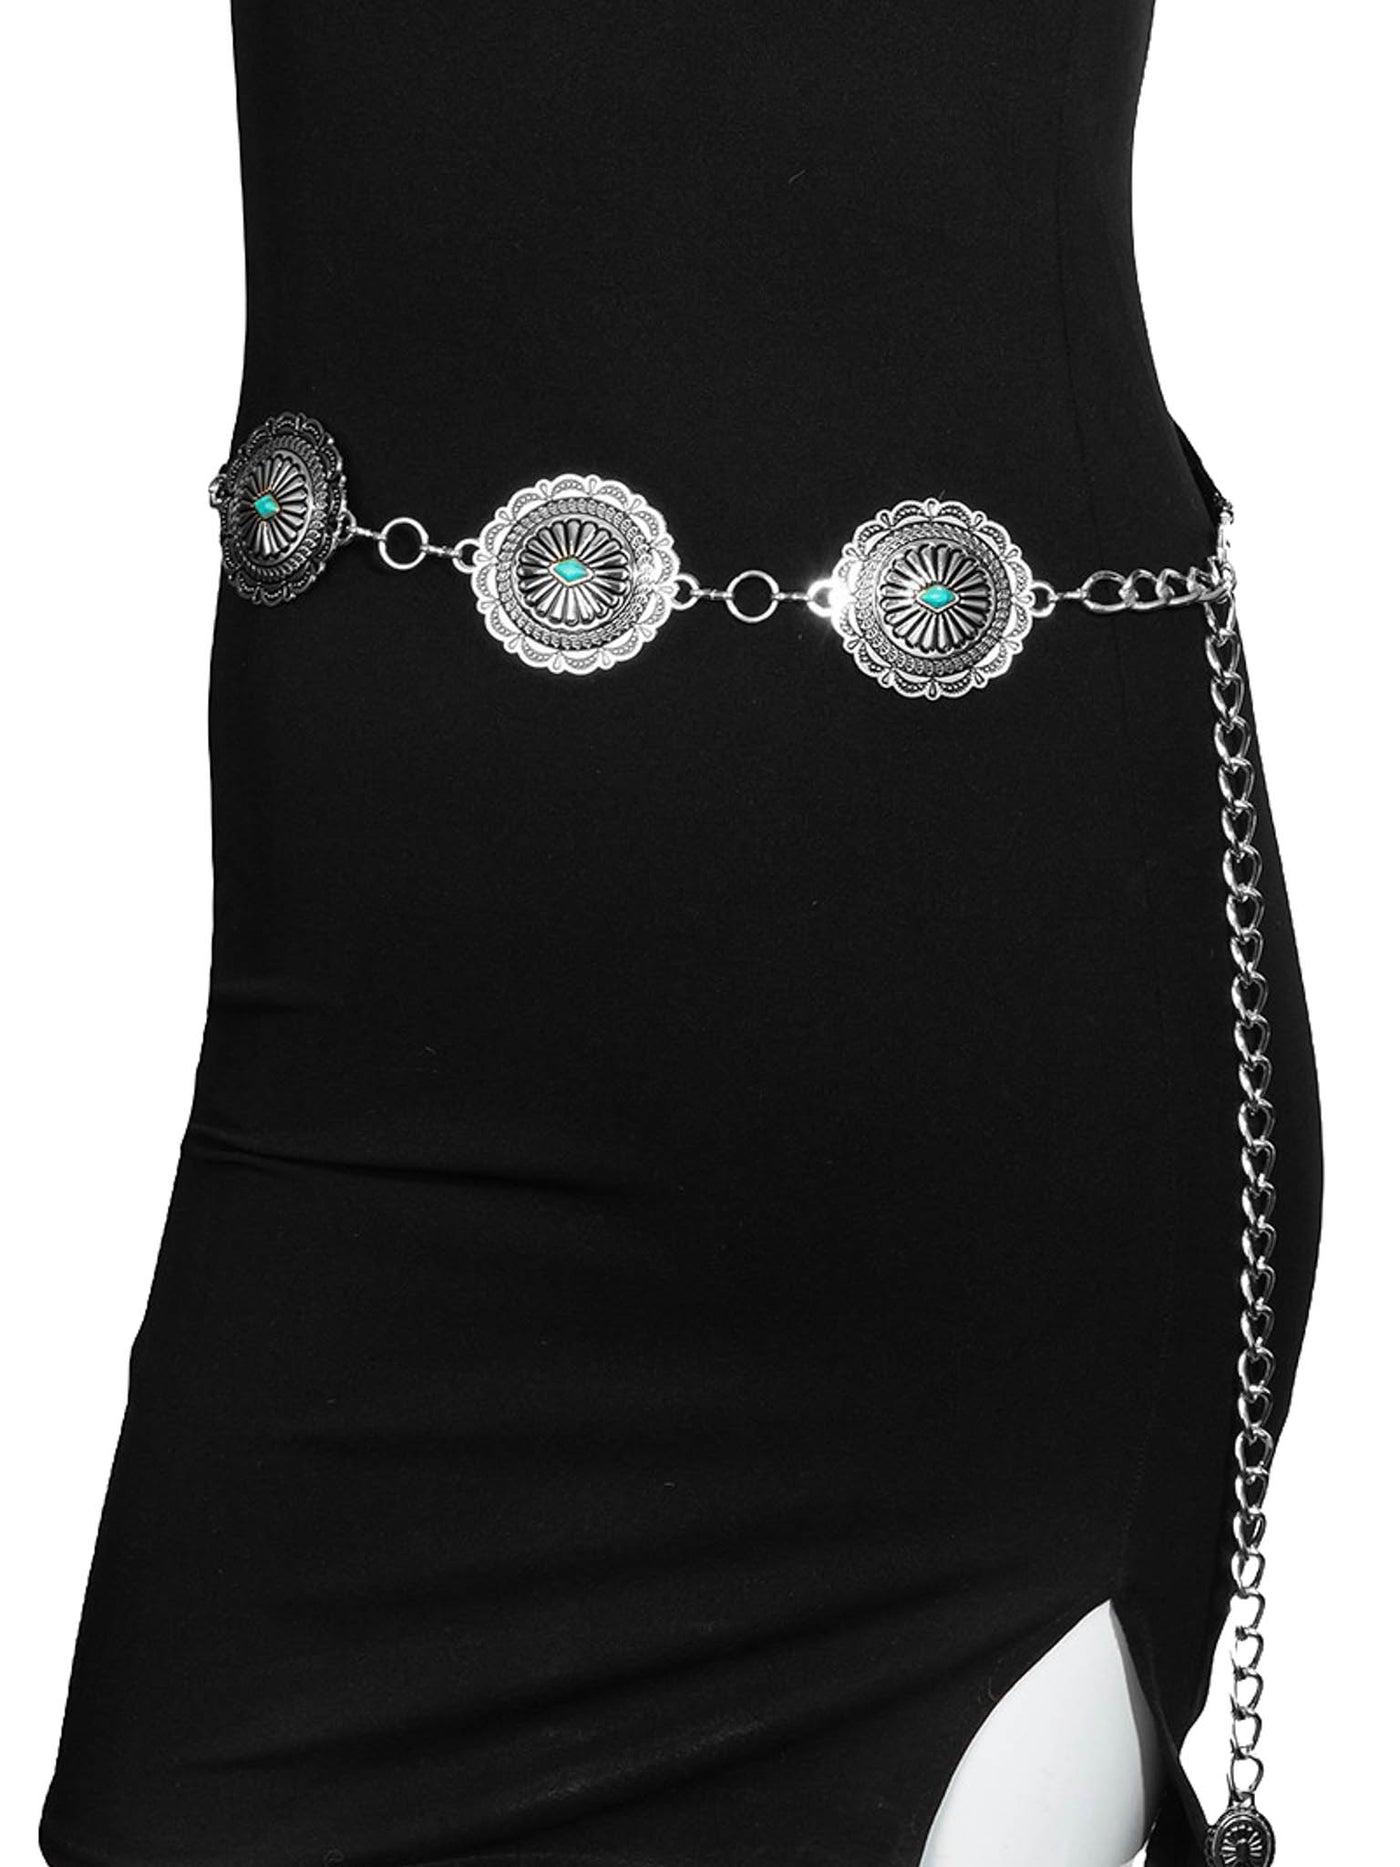 Circle Turquoise Disc Concho Chain Belt